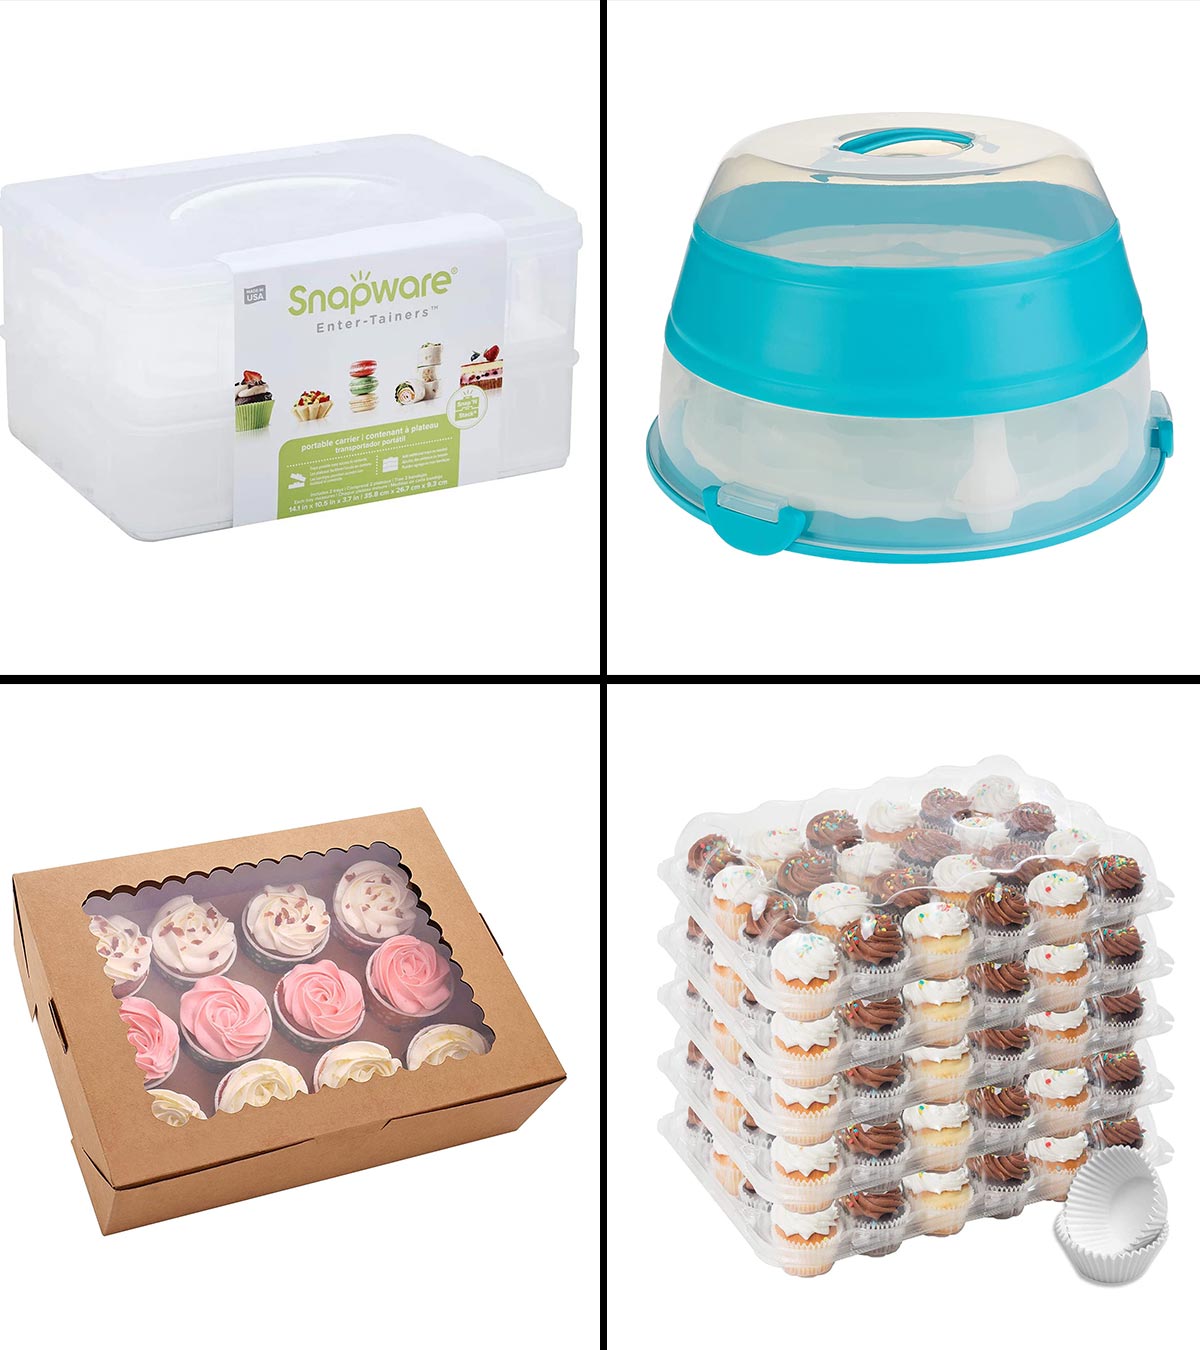 https://www.momjunction.com/wp-content/uploads/2021/08/11-Best-Cupcake-Carriers-To-Buy-In-2021-2.jpg